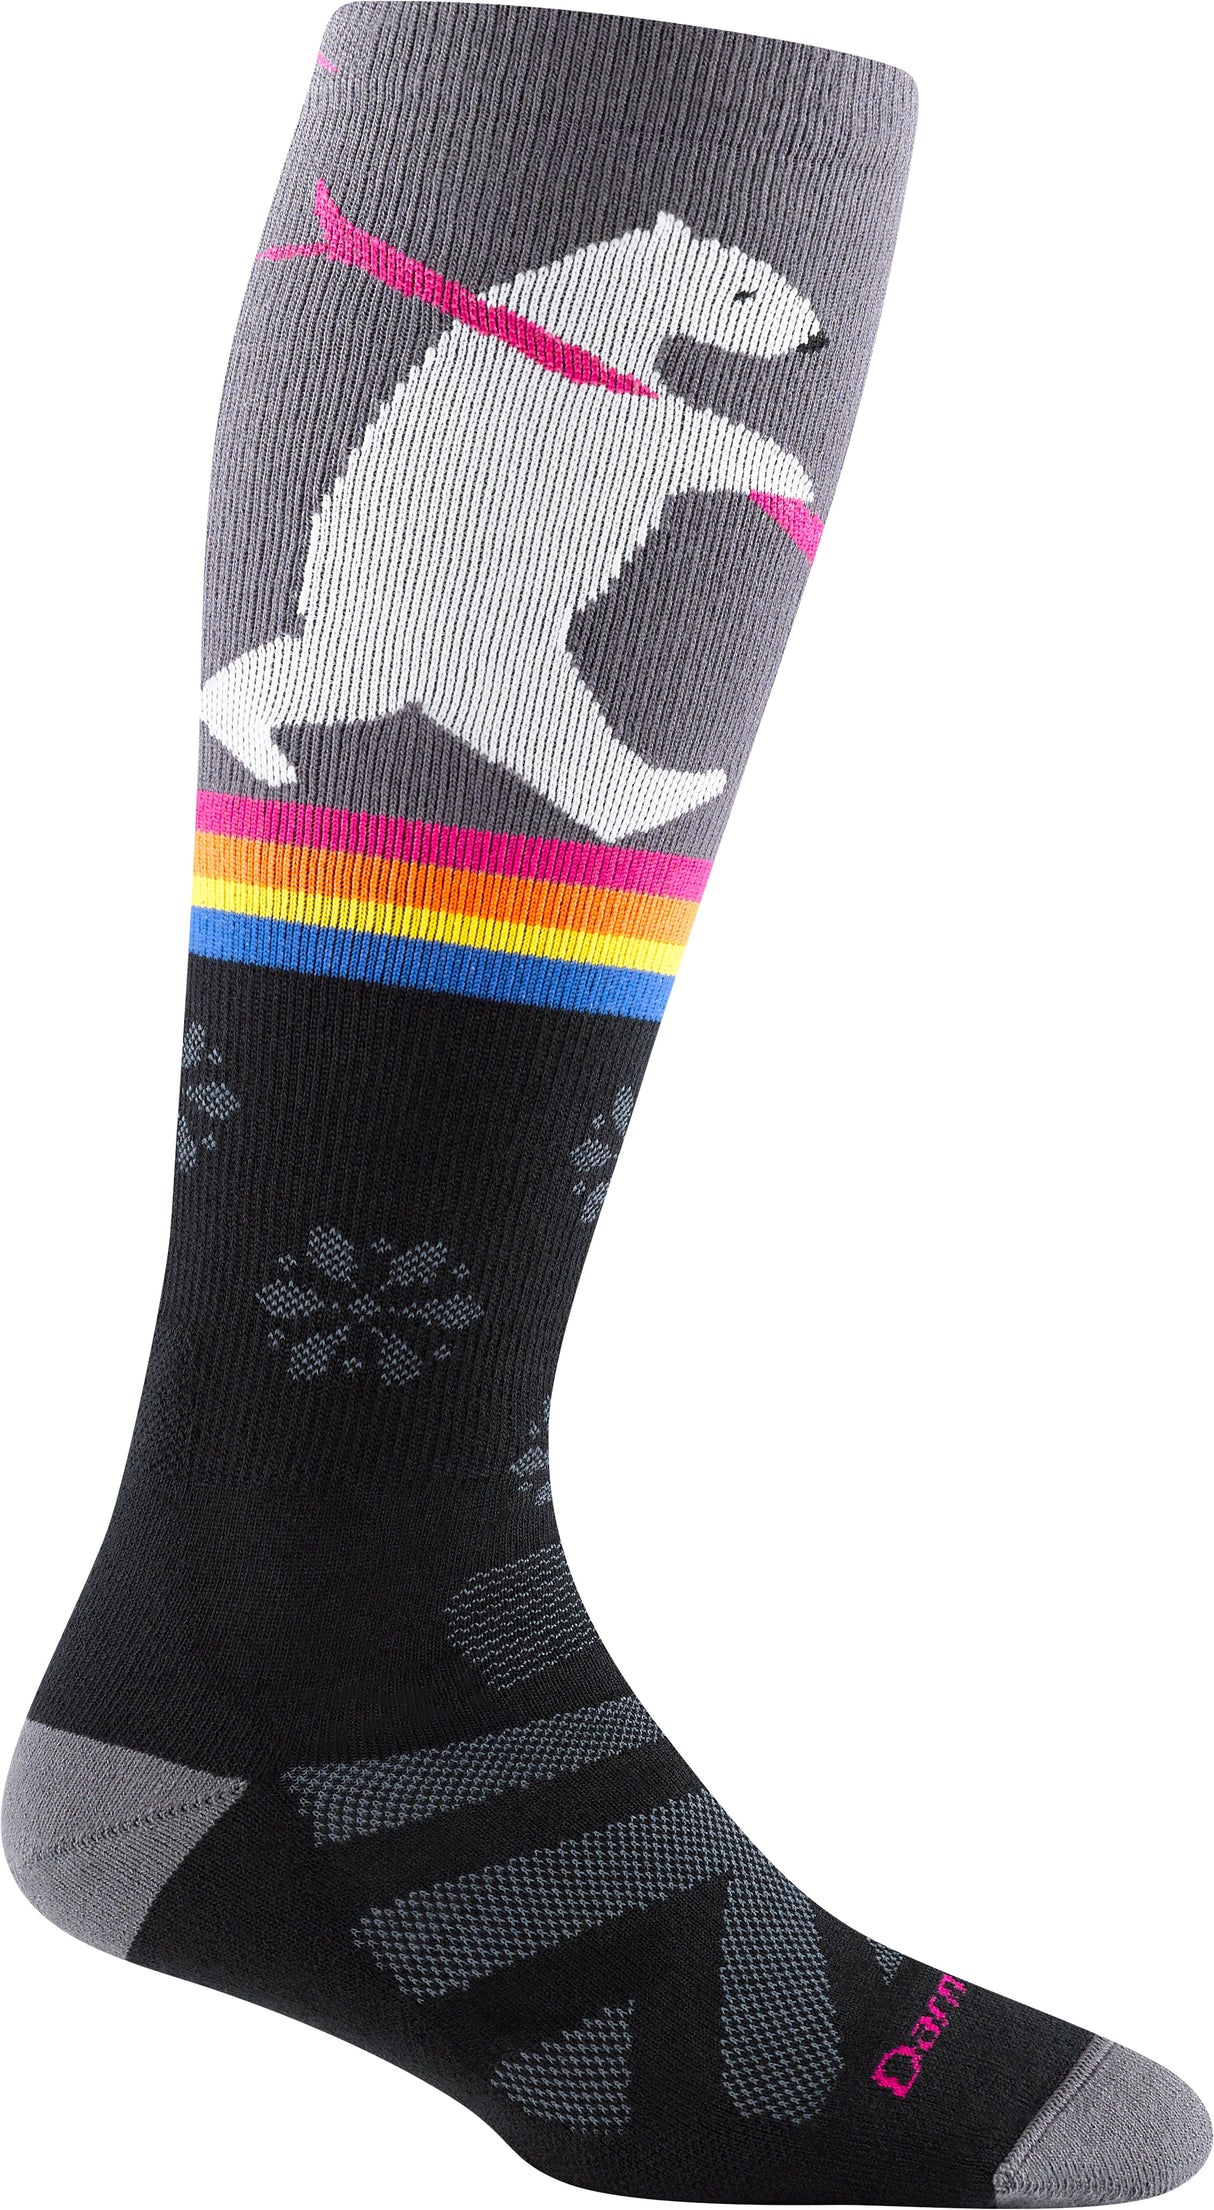 Darn Tough Womens Due North Thermolite Over-The-Calf Midweight Ski & Snowboard Socks  -  Small / Black